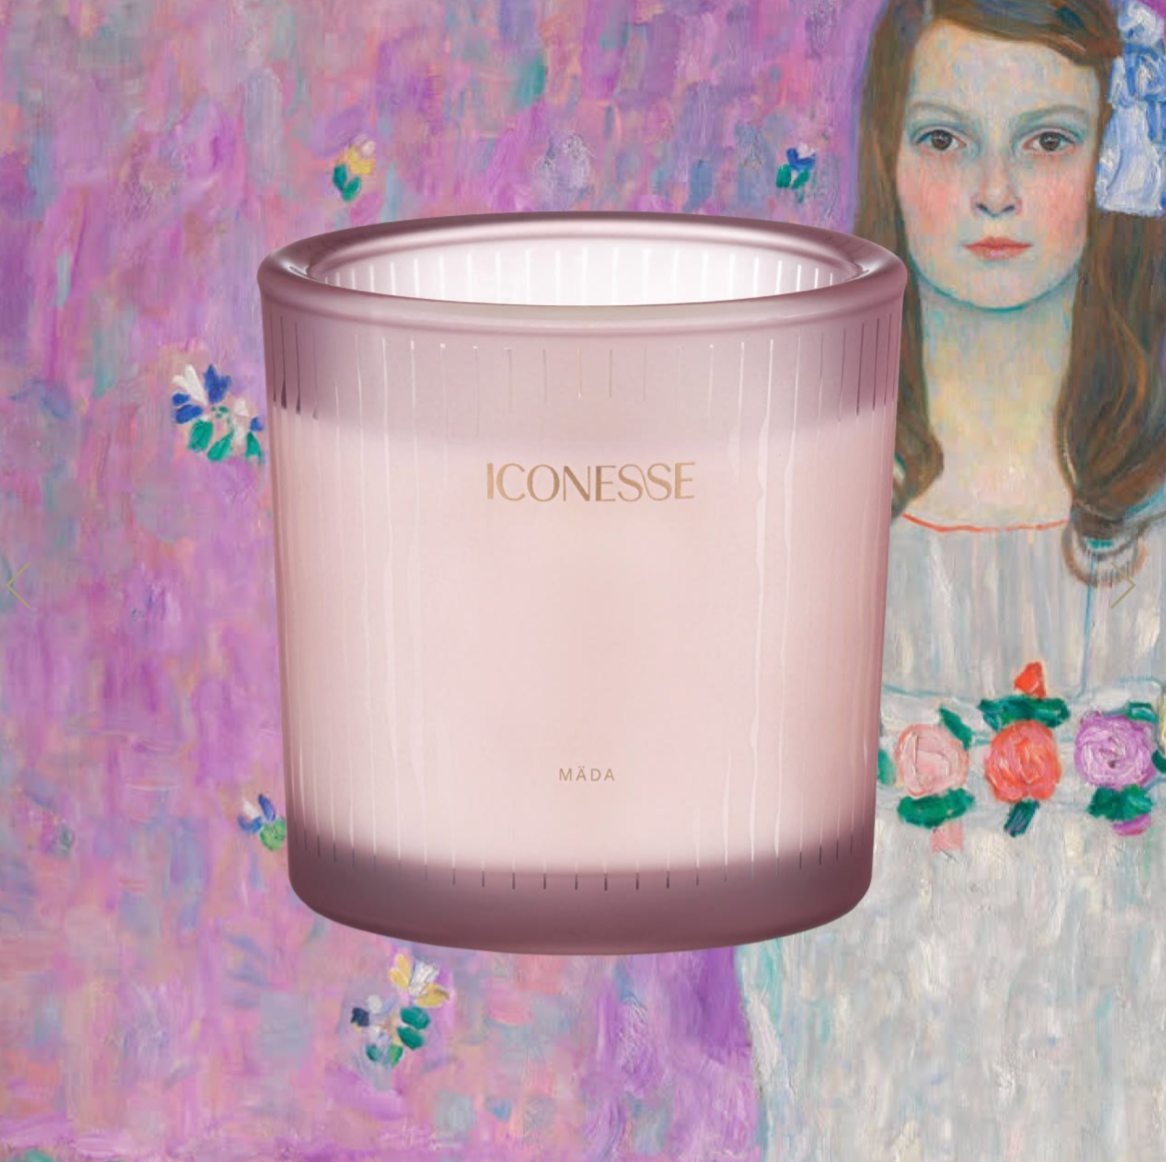 Mäda candle by Iconesse